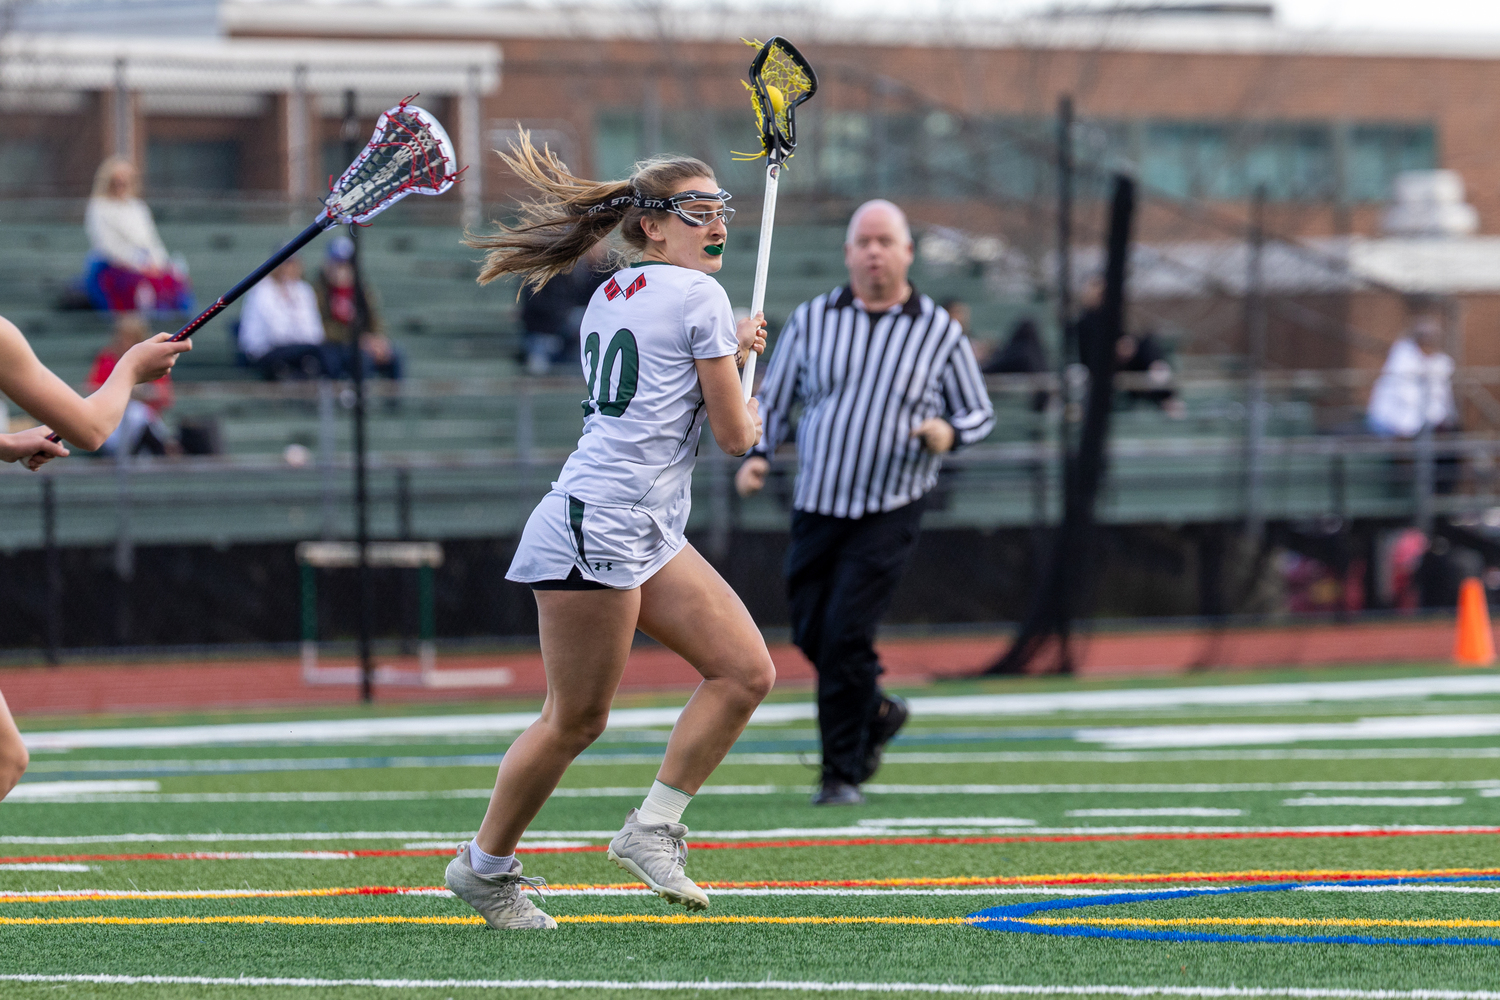 Senior attack Joely Schaumloffel looks to make a play during Westhampton Beach's 11-5 win over Miller Place April 24. RON ESPOSITO